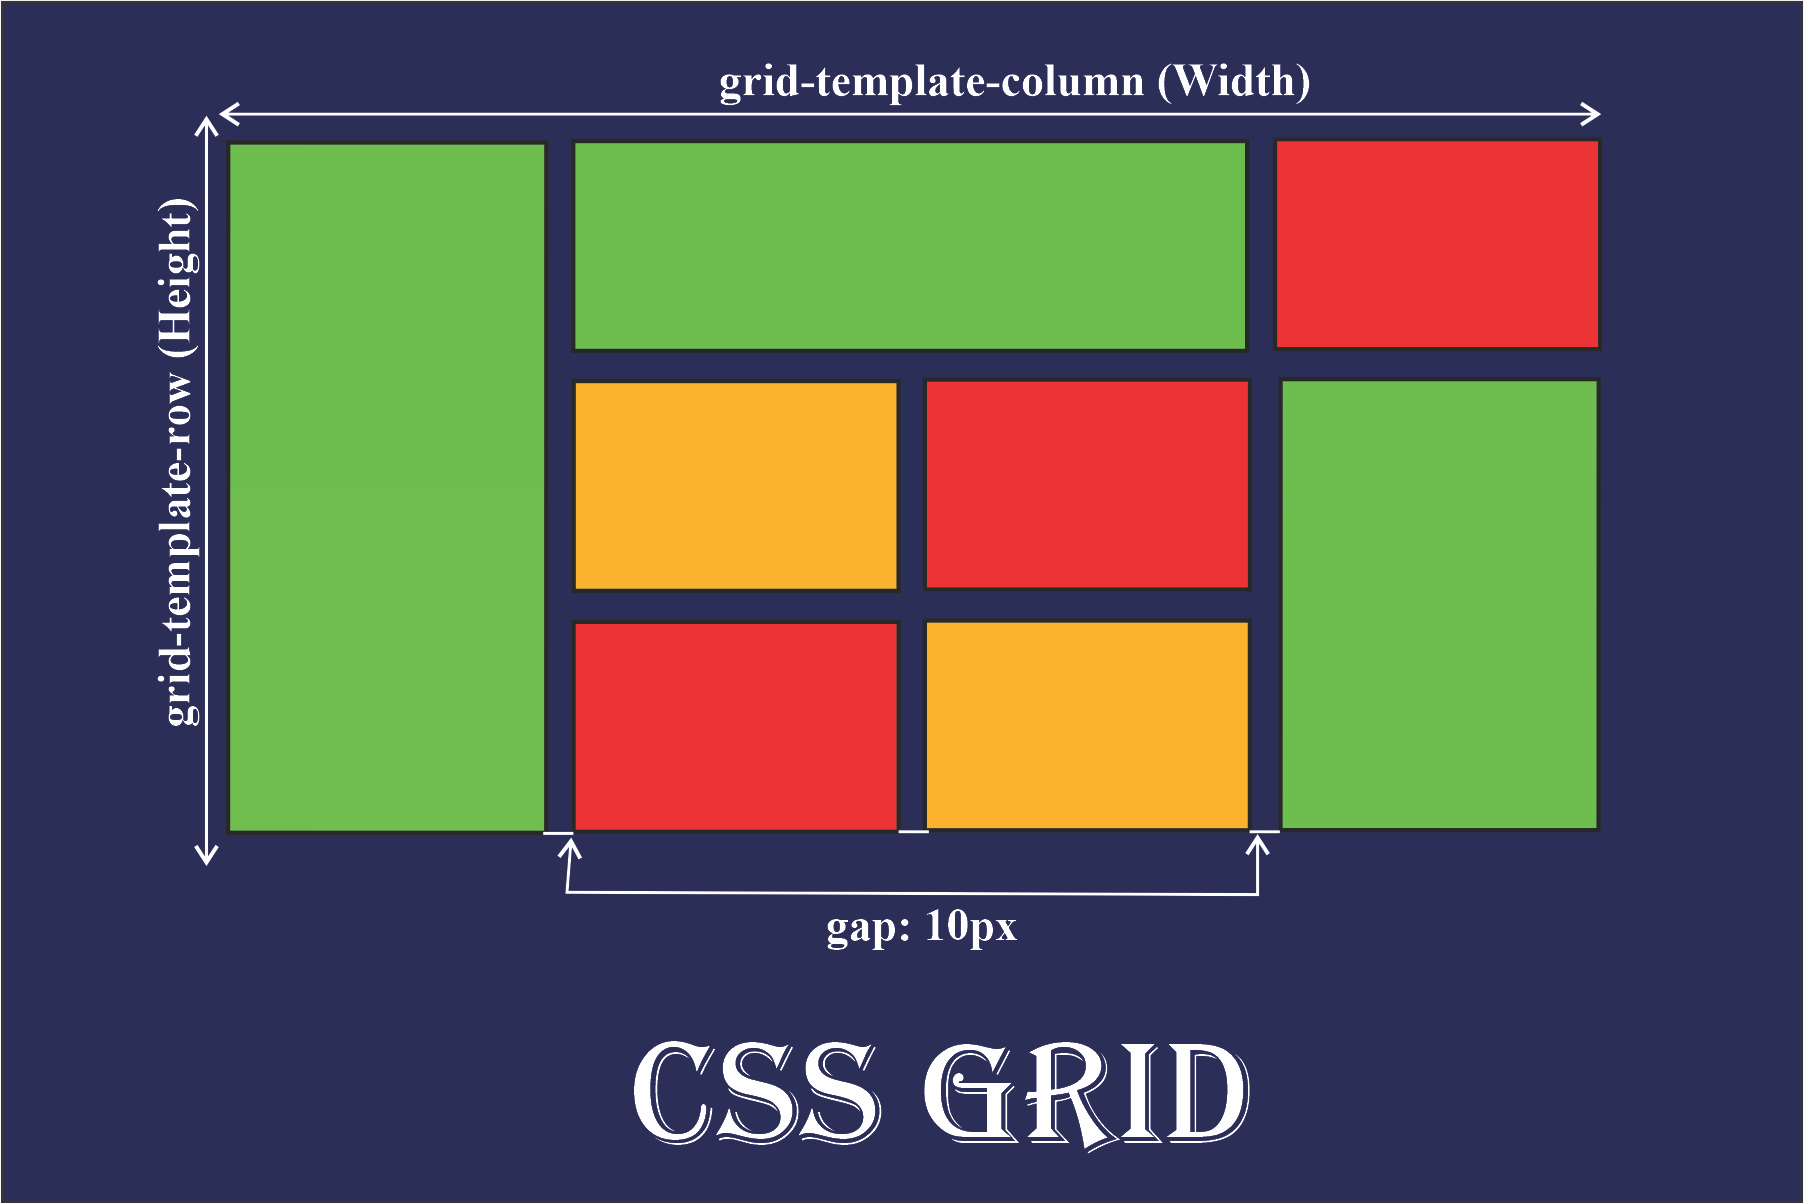 https://www.freecodecamp.org/news/content/images/2022/05/CSS-GRID-3.png